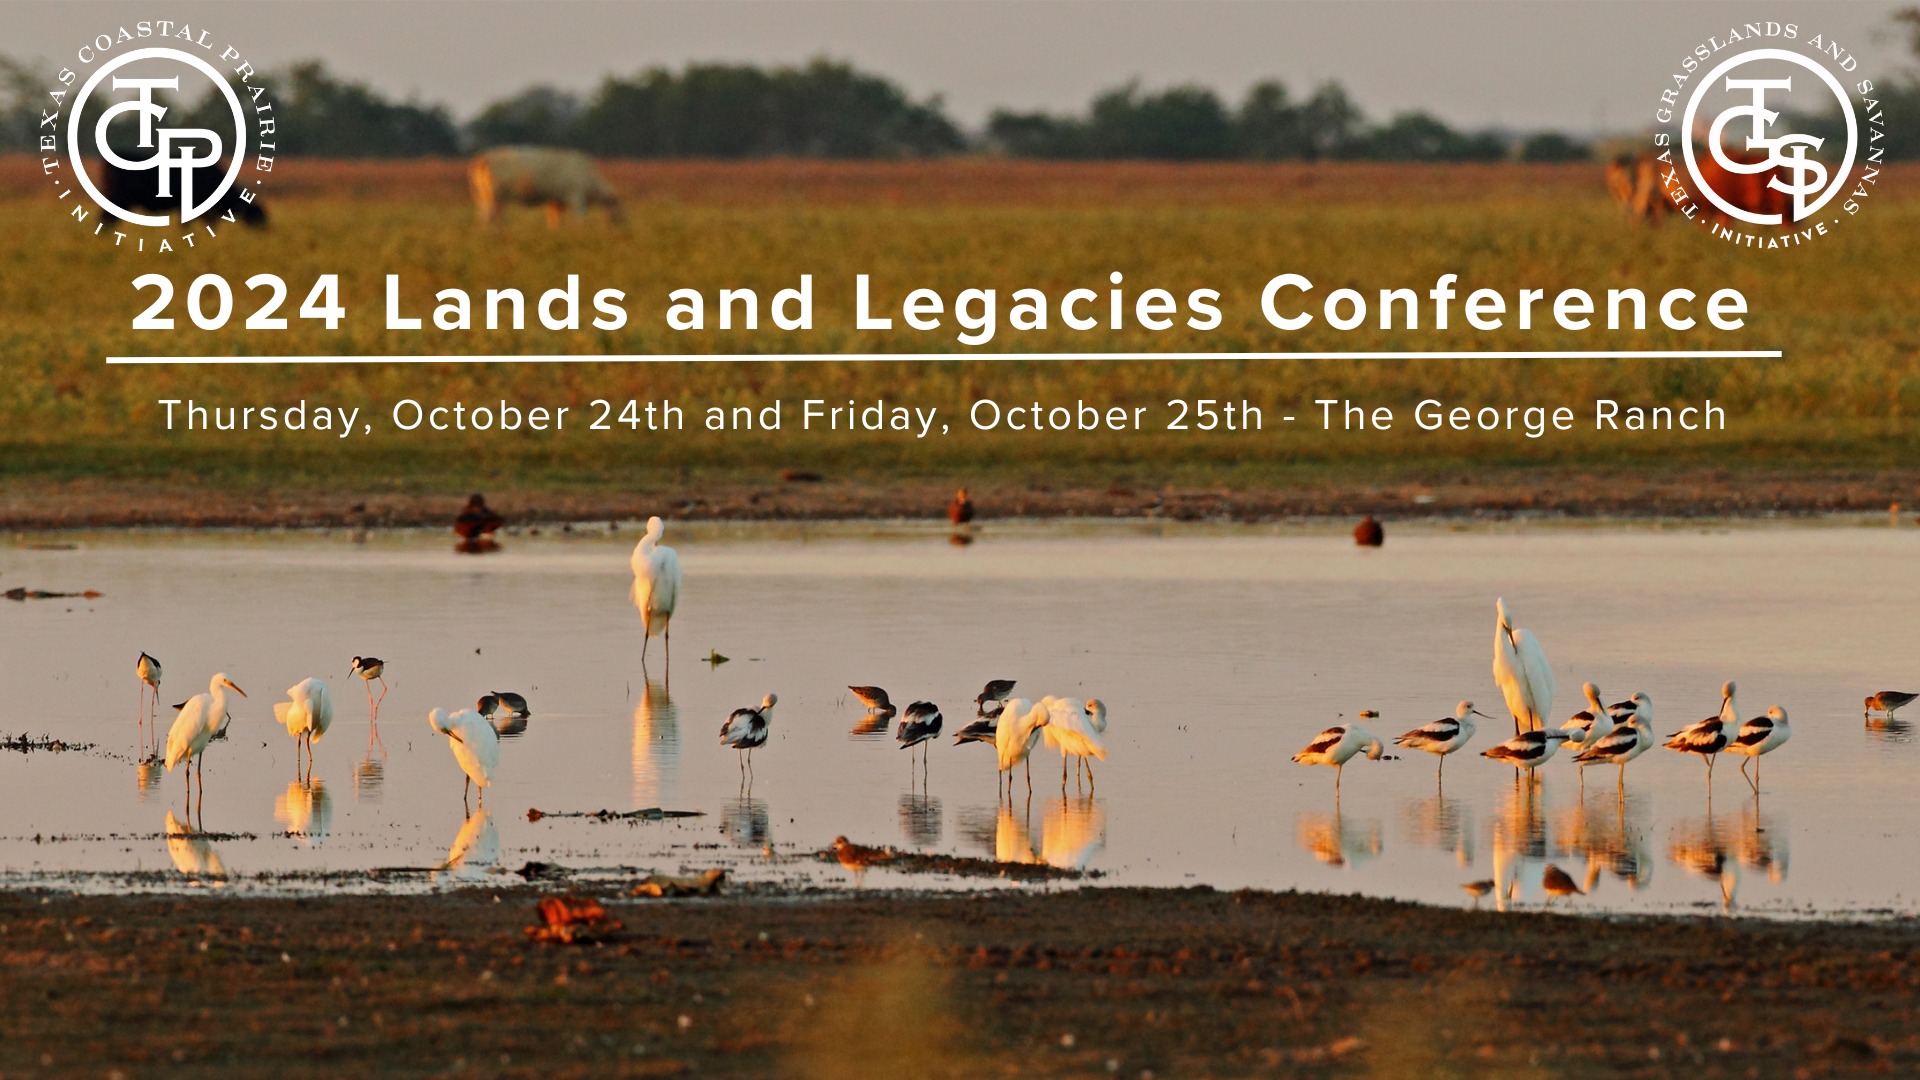 Shaping the Future of Land Conservation: Coastal Prairie Conservancy to Host Lands & Legacies Conference at George Ranch